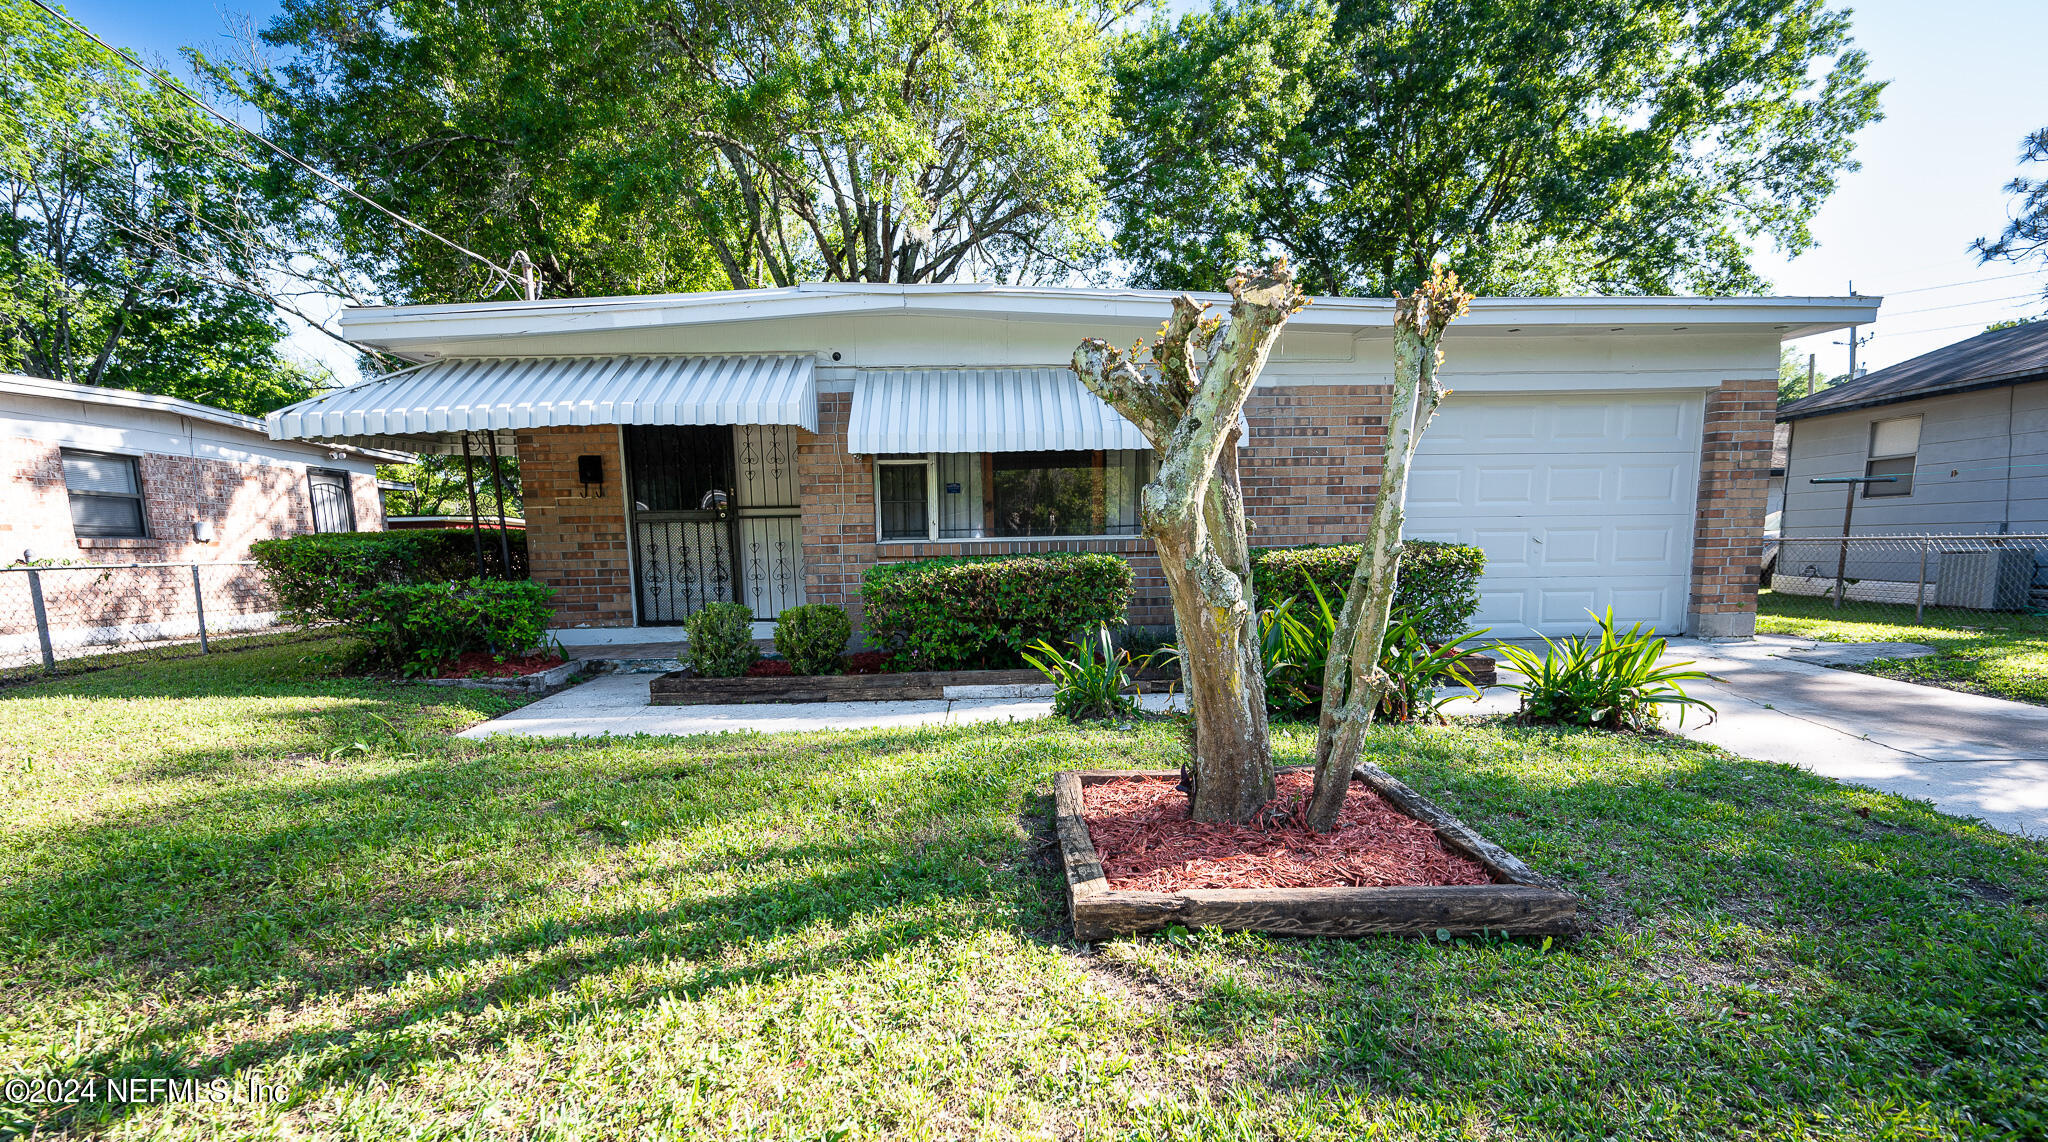 Jacksonville, FL home for sale located at 2692 W 25th Street, Jacksonville, FL 32209